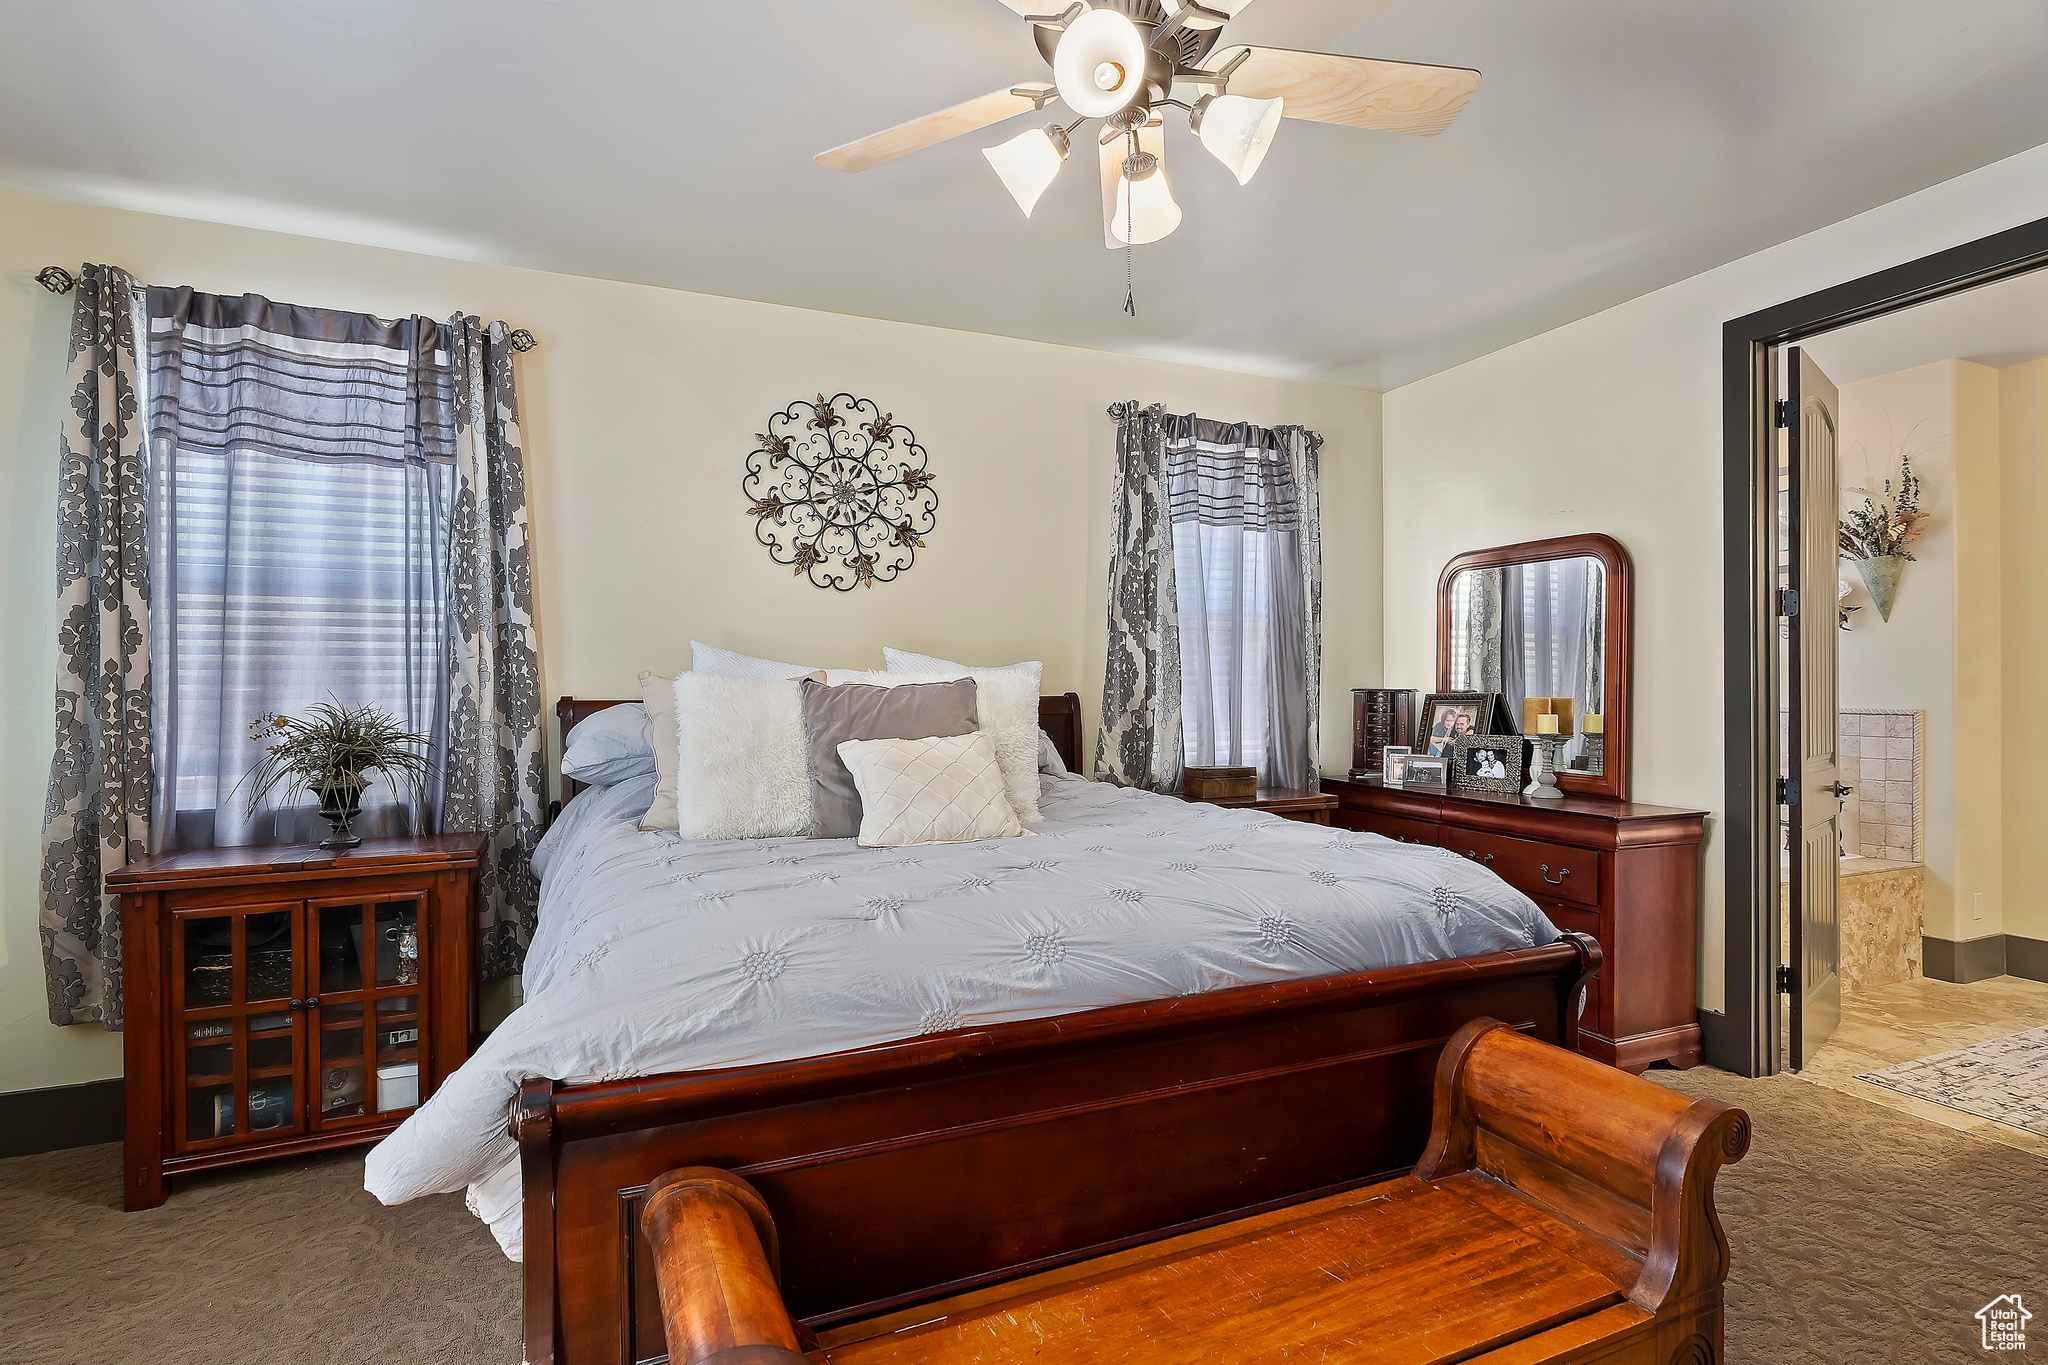 Bedroom featuring dark colored carpet, ensuite bath, and ceiling fan